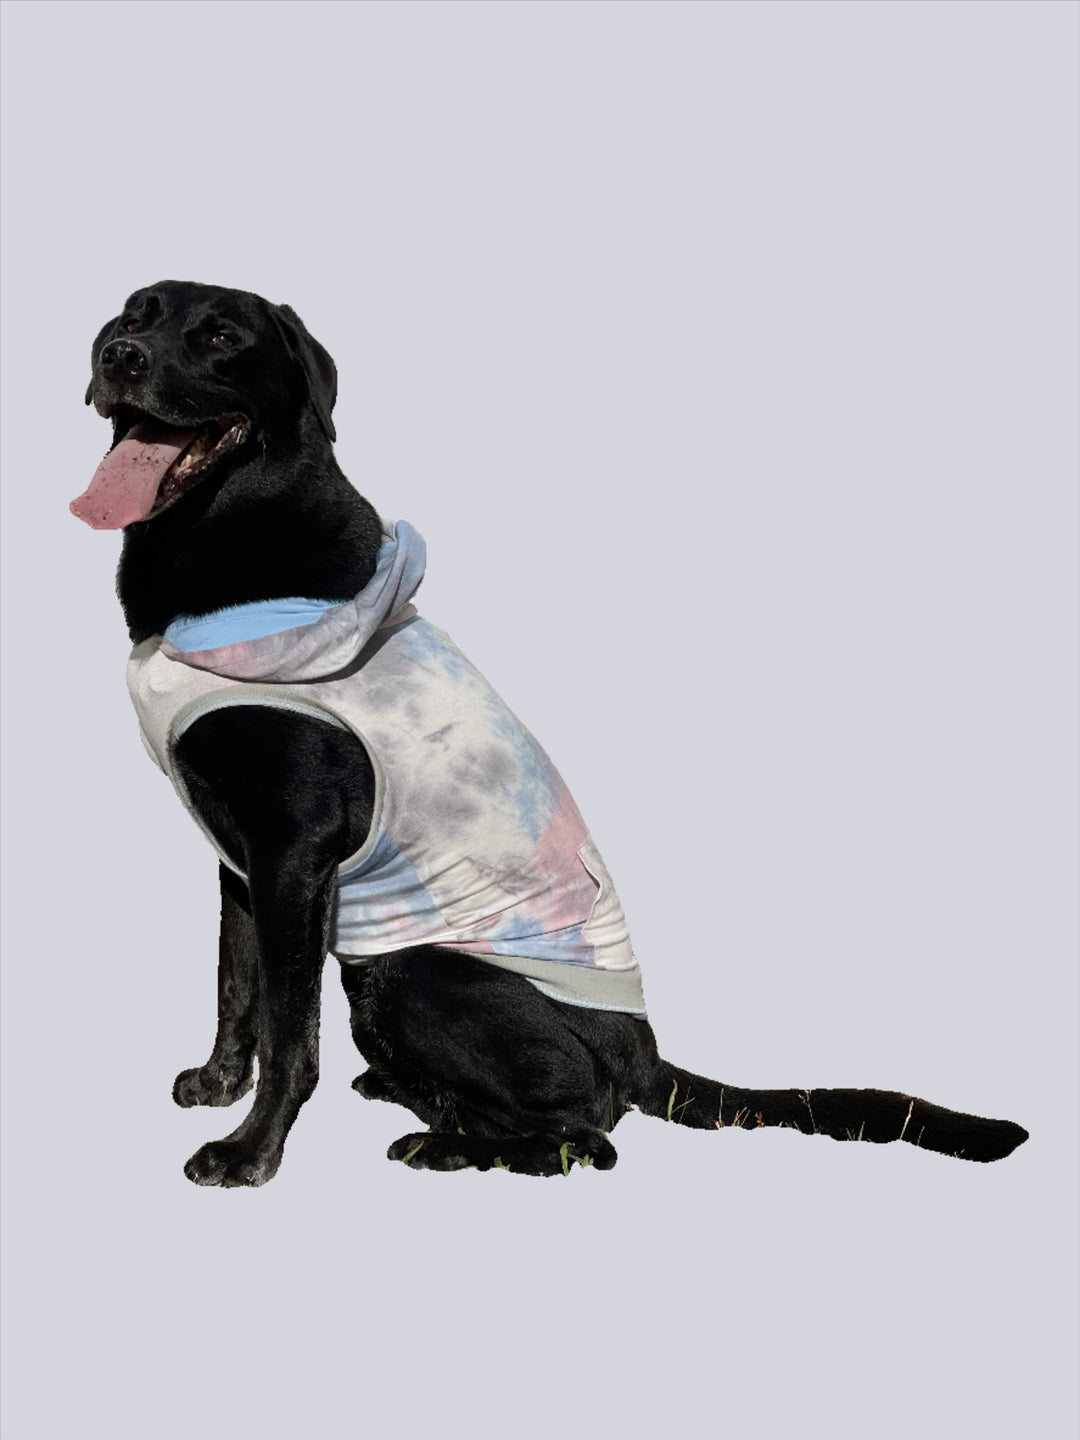 Large dog clothes. Clothing for labs. Tie dye dog clothes.